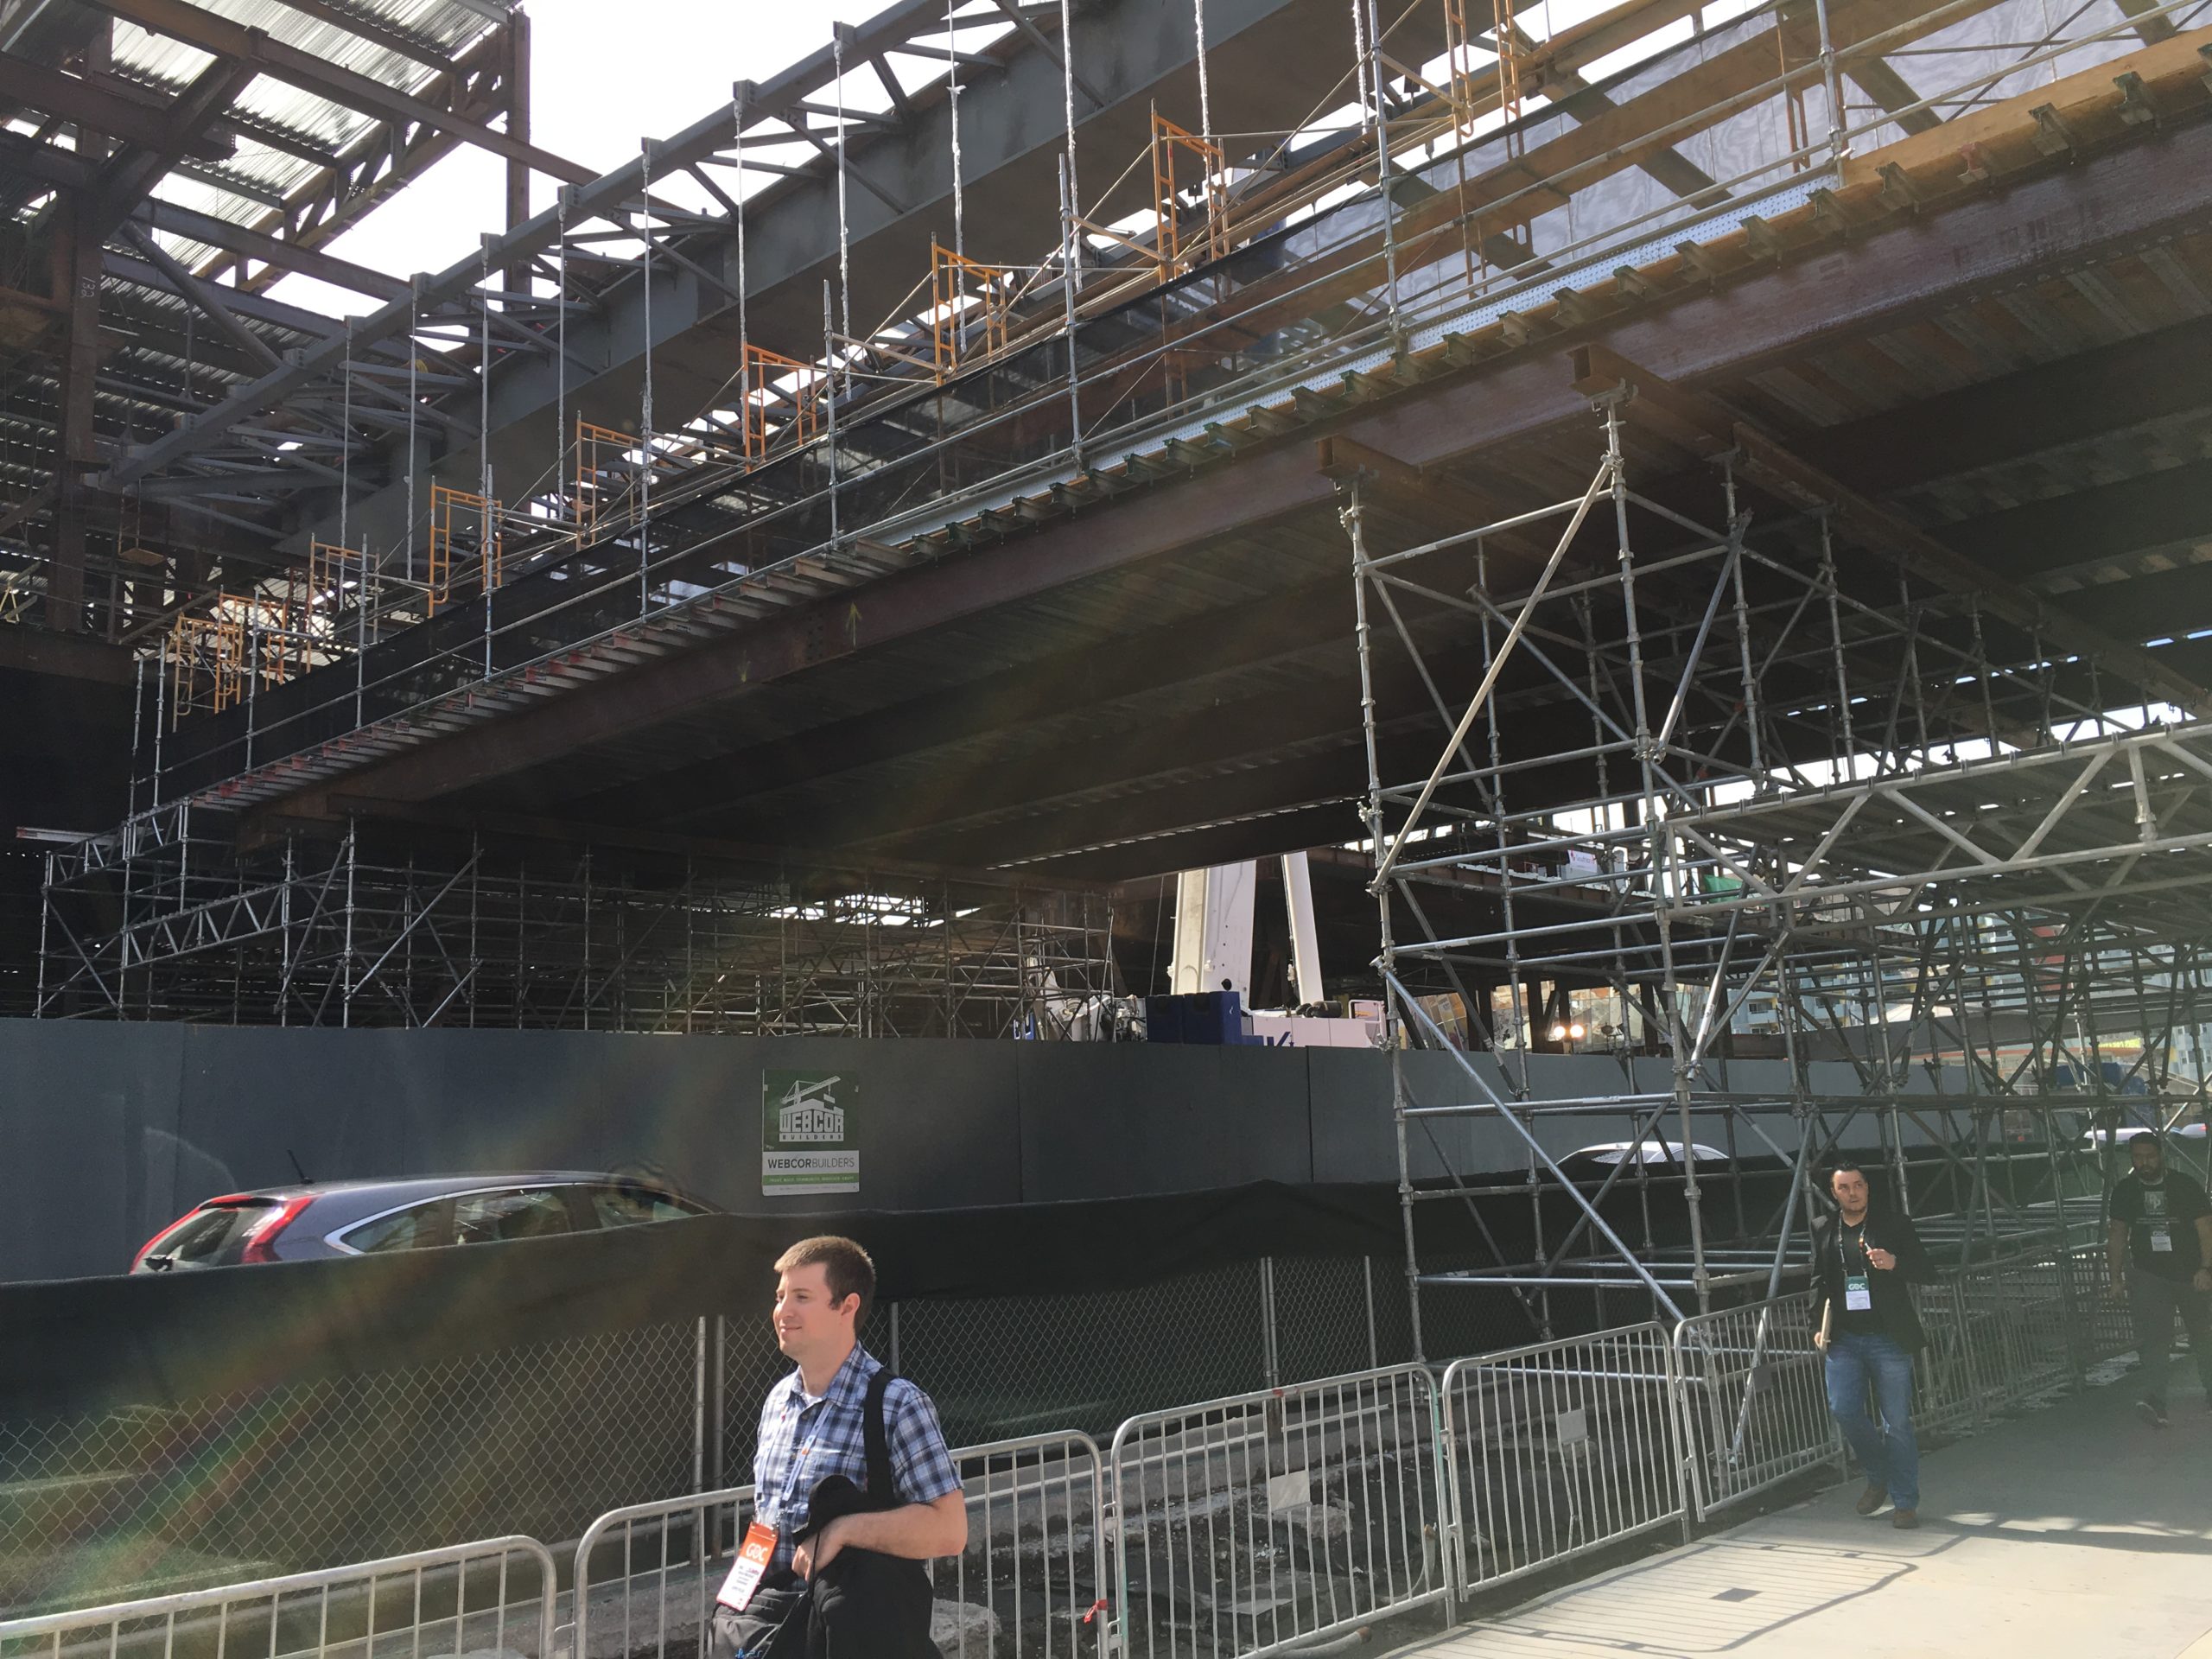 GDC 2018 Is In The Middle Of A Construction Zone